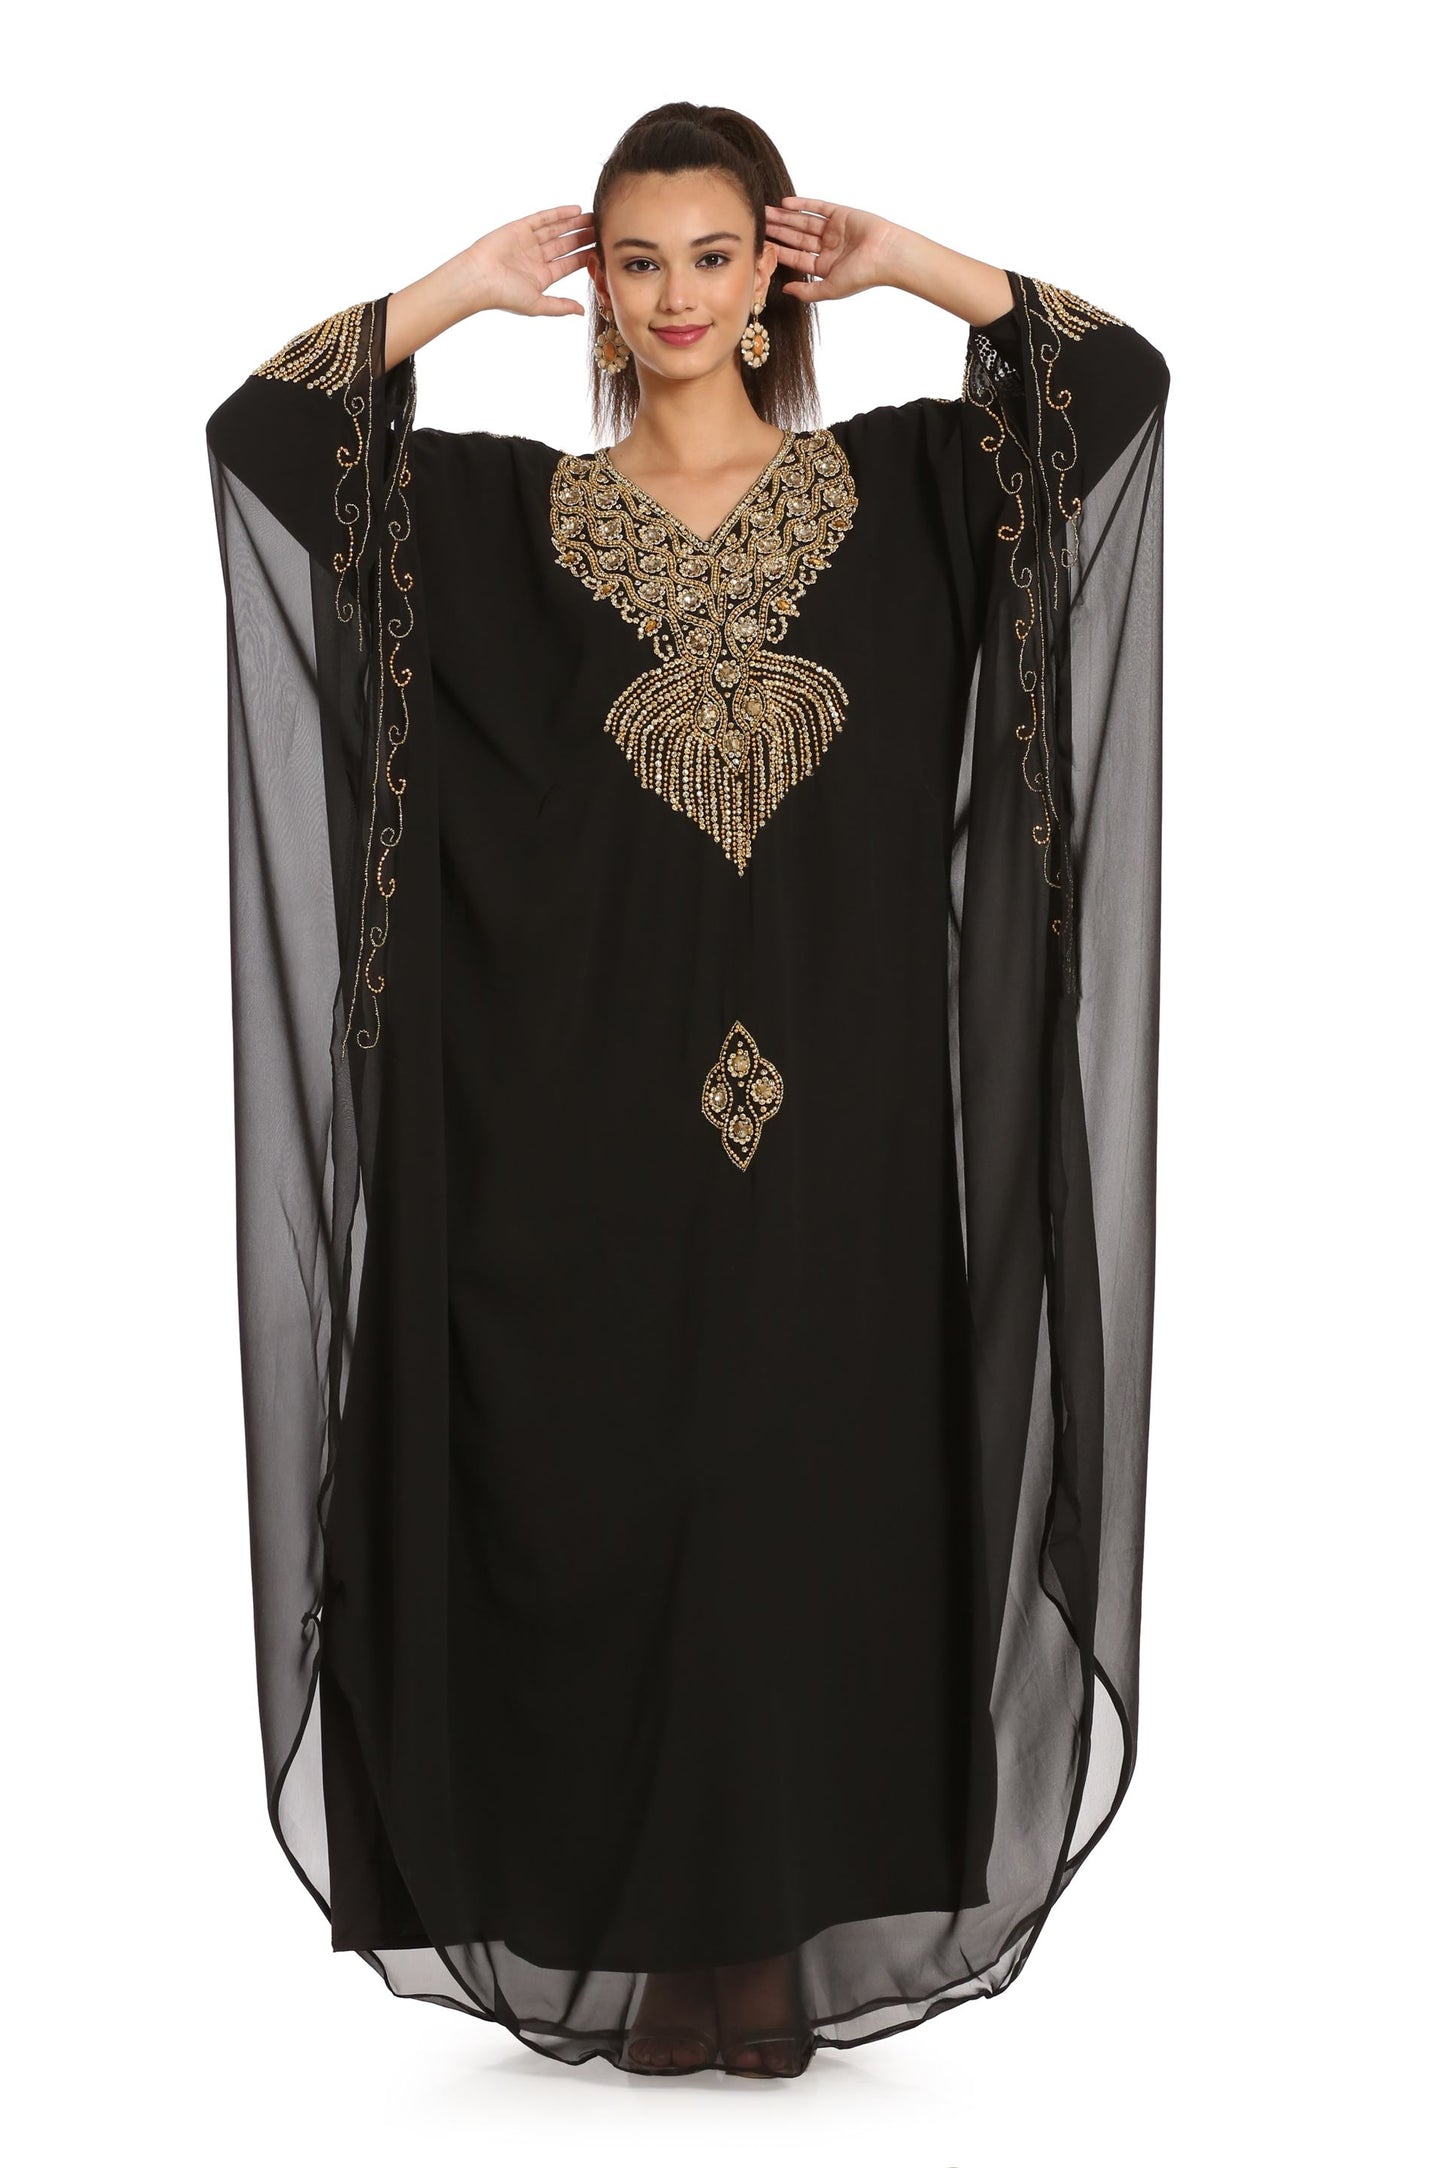 Handicraft Kaftan dress Embellished with Beads and Crystals - Maxim Creation